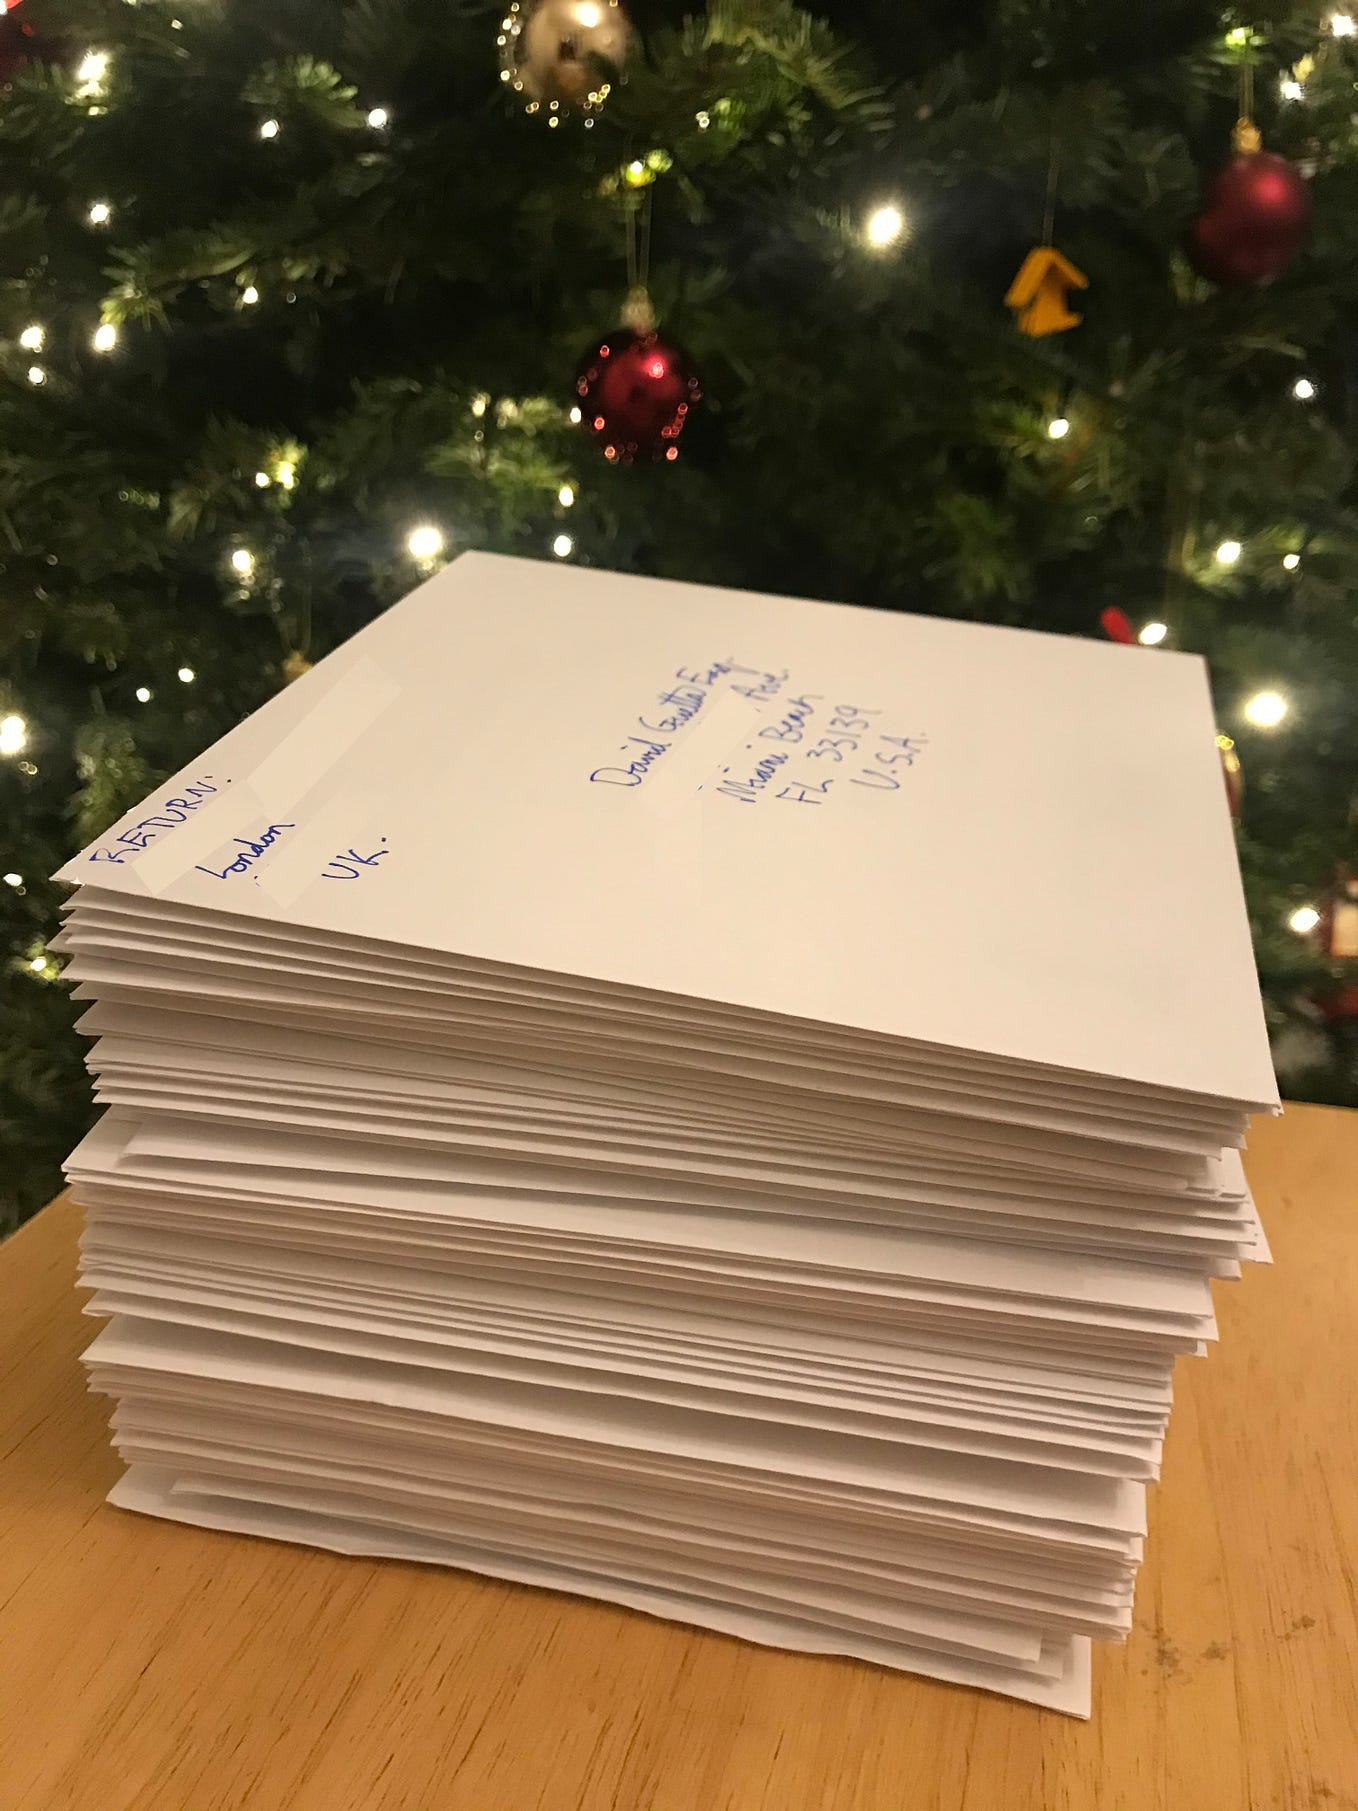 The 4 Lessons I Learned From Sending 100 Christmas Cards That Will Make You Happier